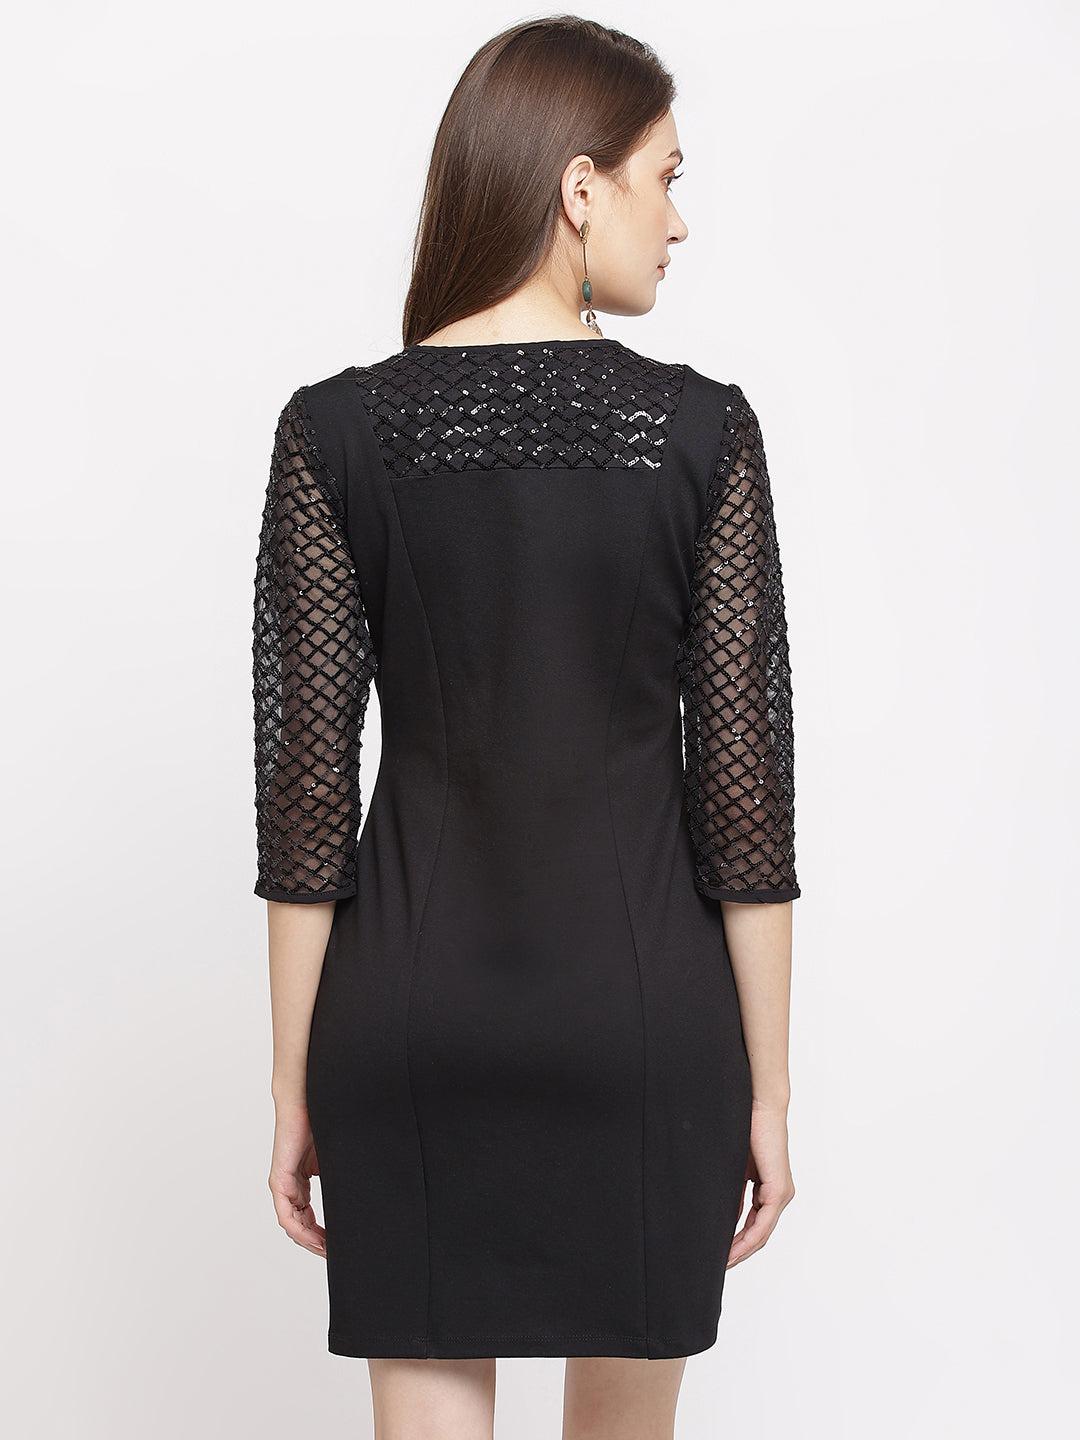 Black Solid Dress With 3/4 Sleeve